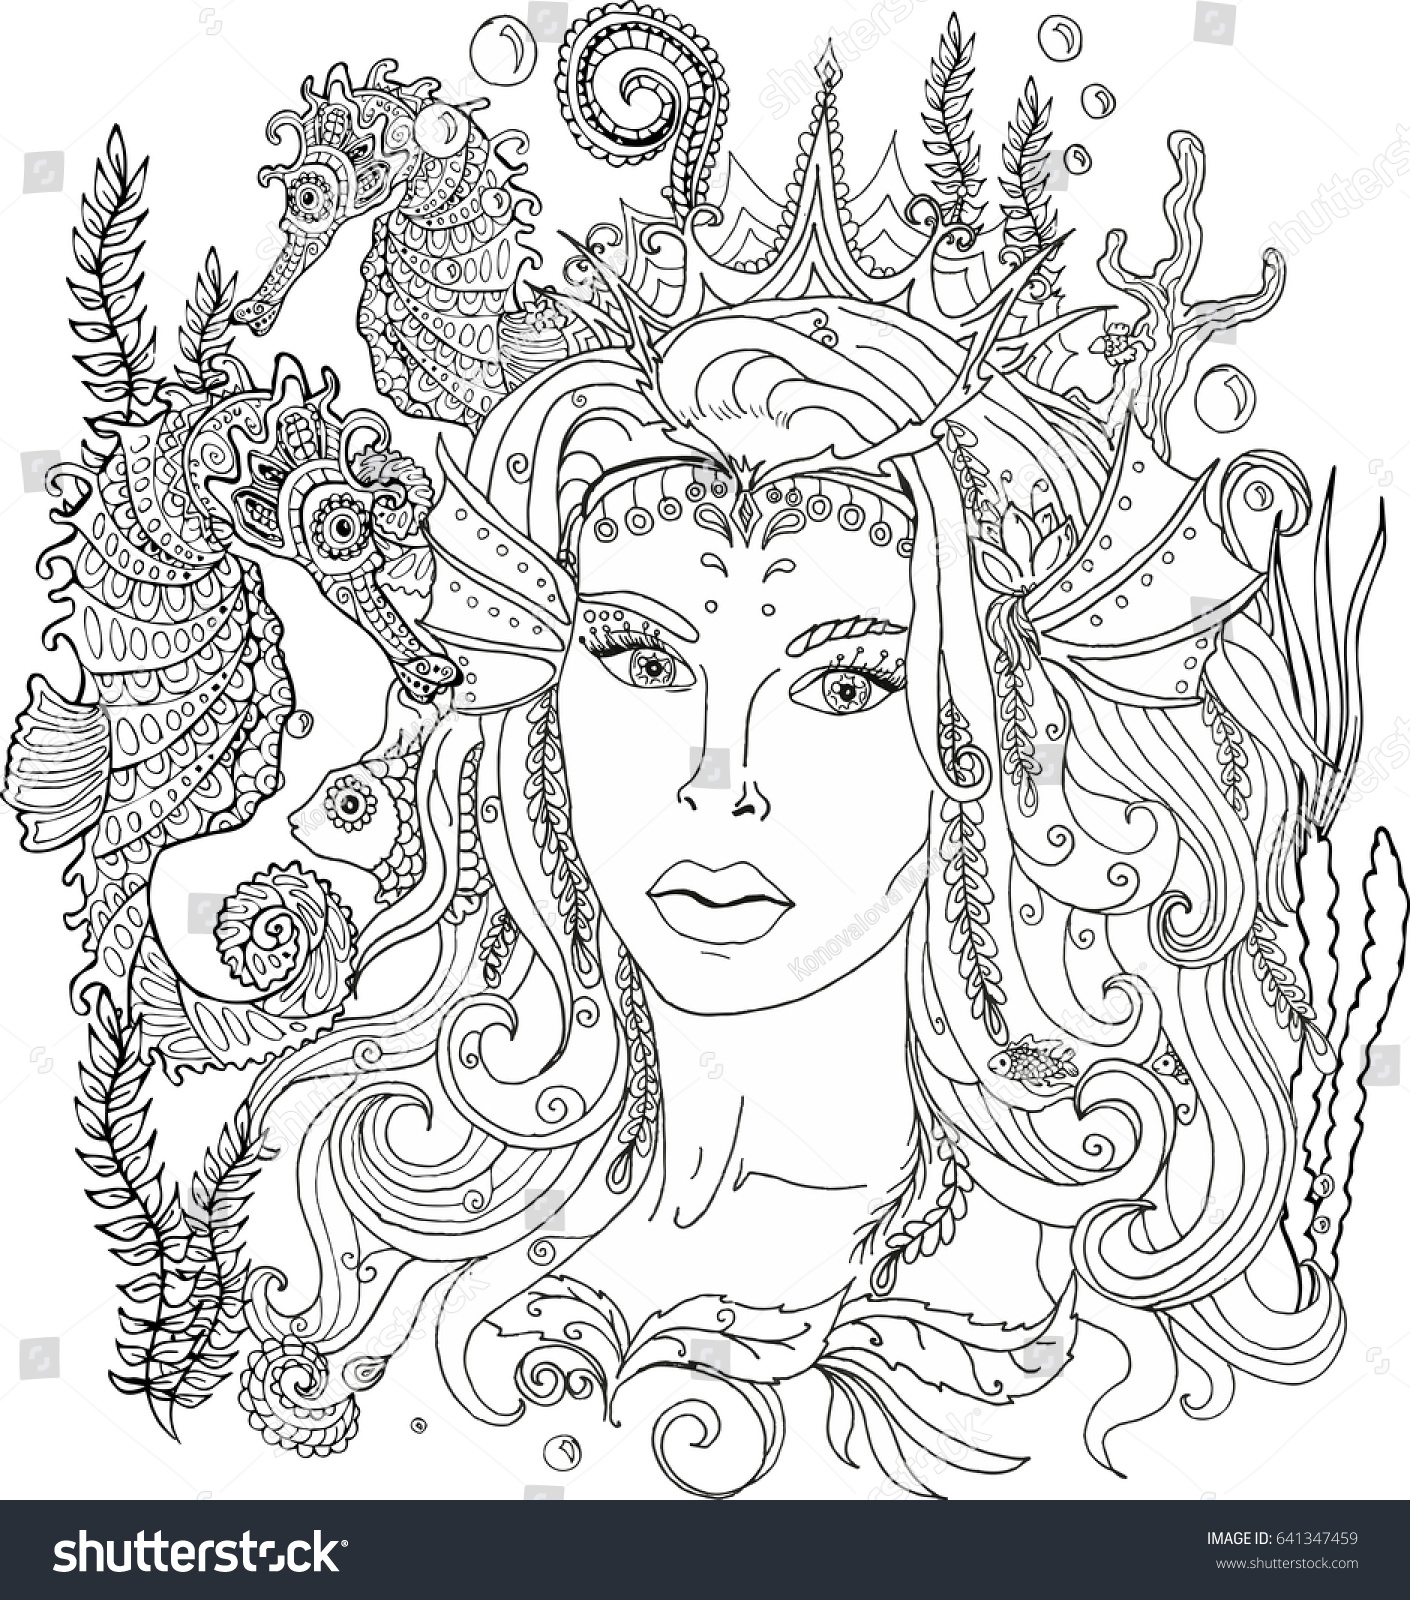 realistic-mermaid-coloring-pages-for-adults-if-you-would-like-to